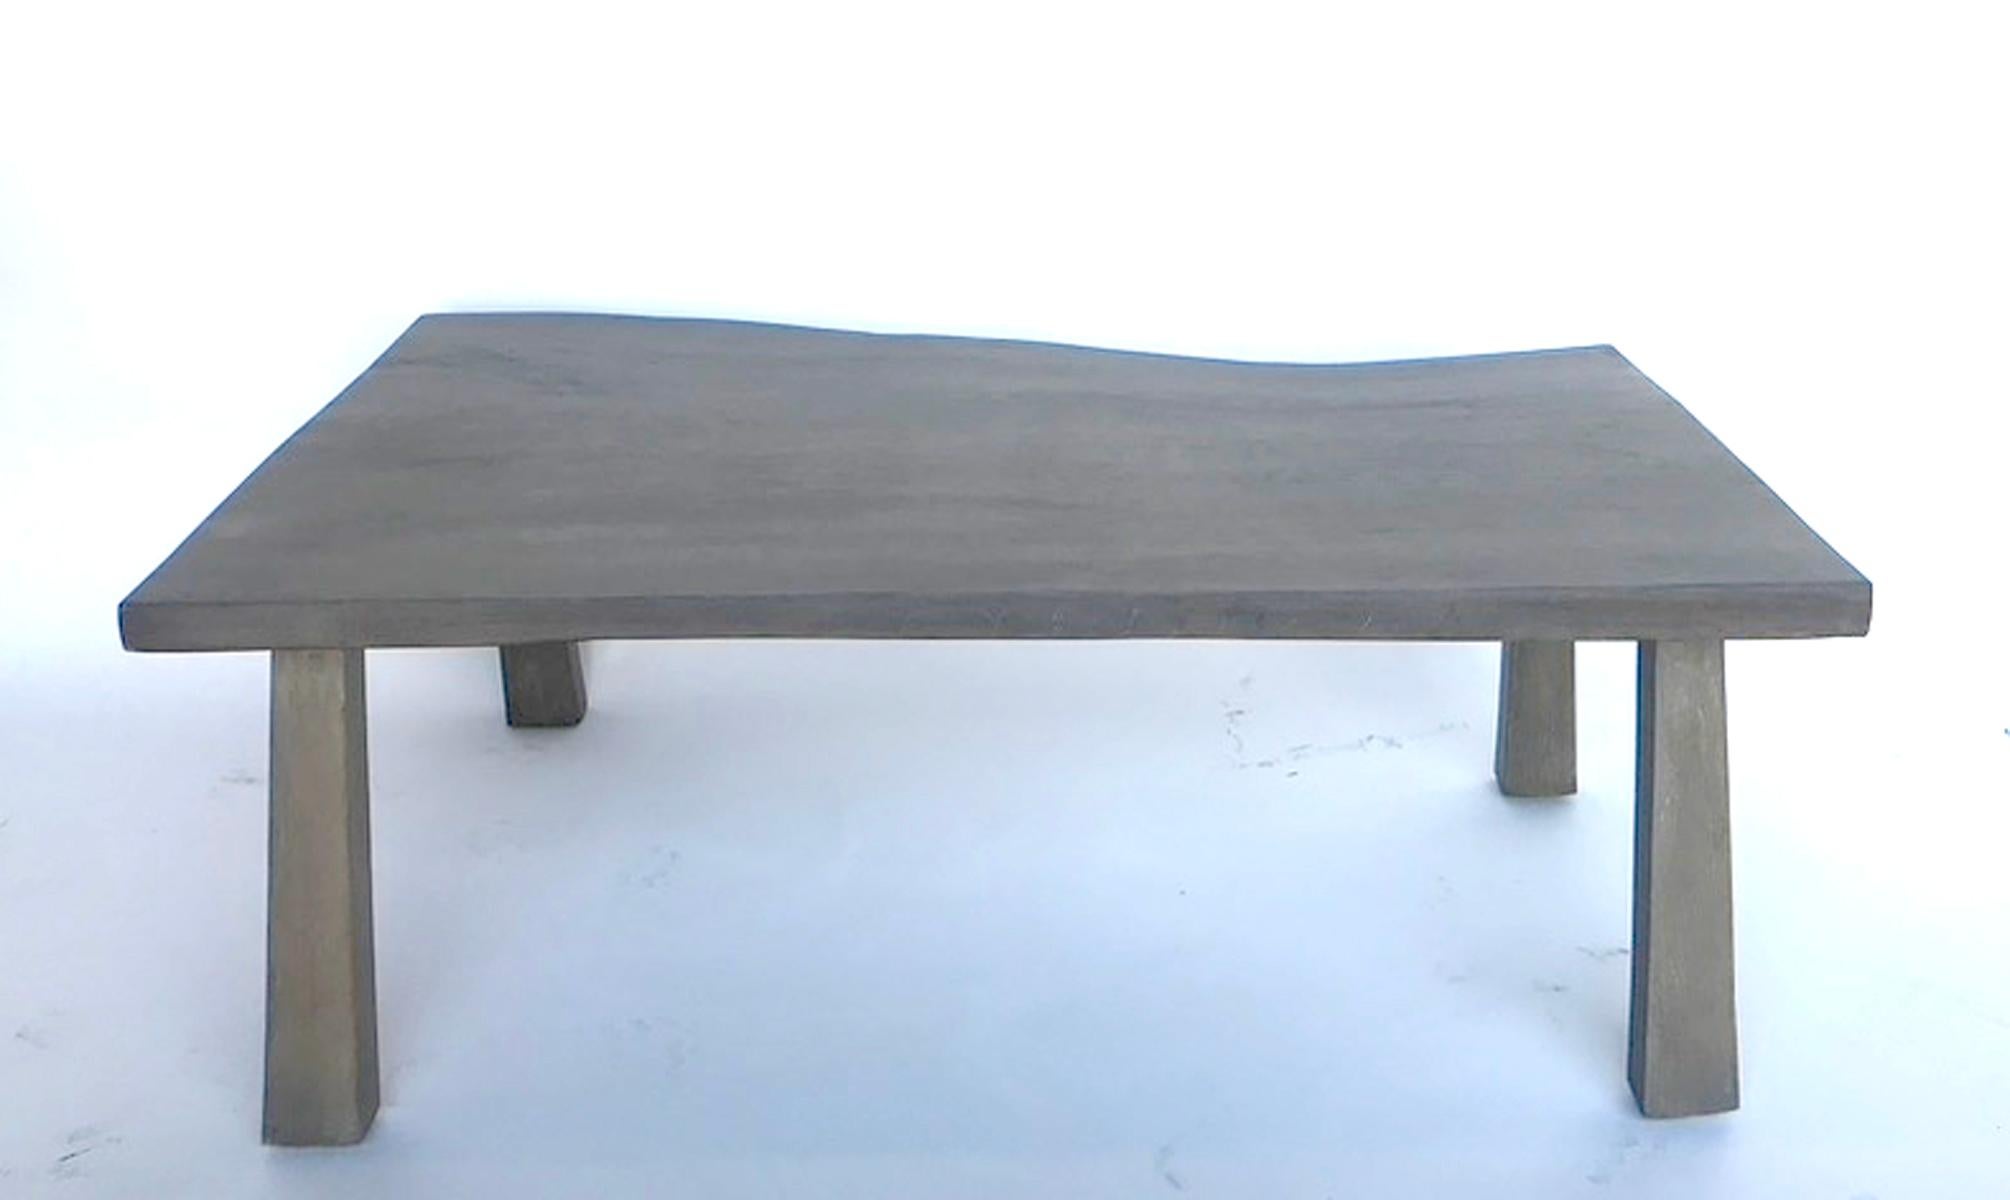 Live edge eucalyptus wood coffee table with straight legs. Medium soft gray finish. Smooth surface. The depth of the table varies from 22.5 inches to 29.5 inches.